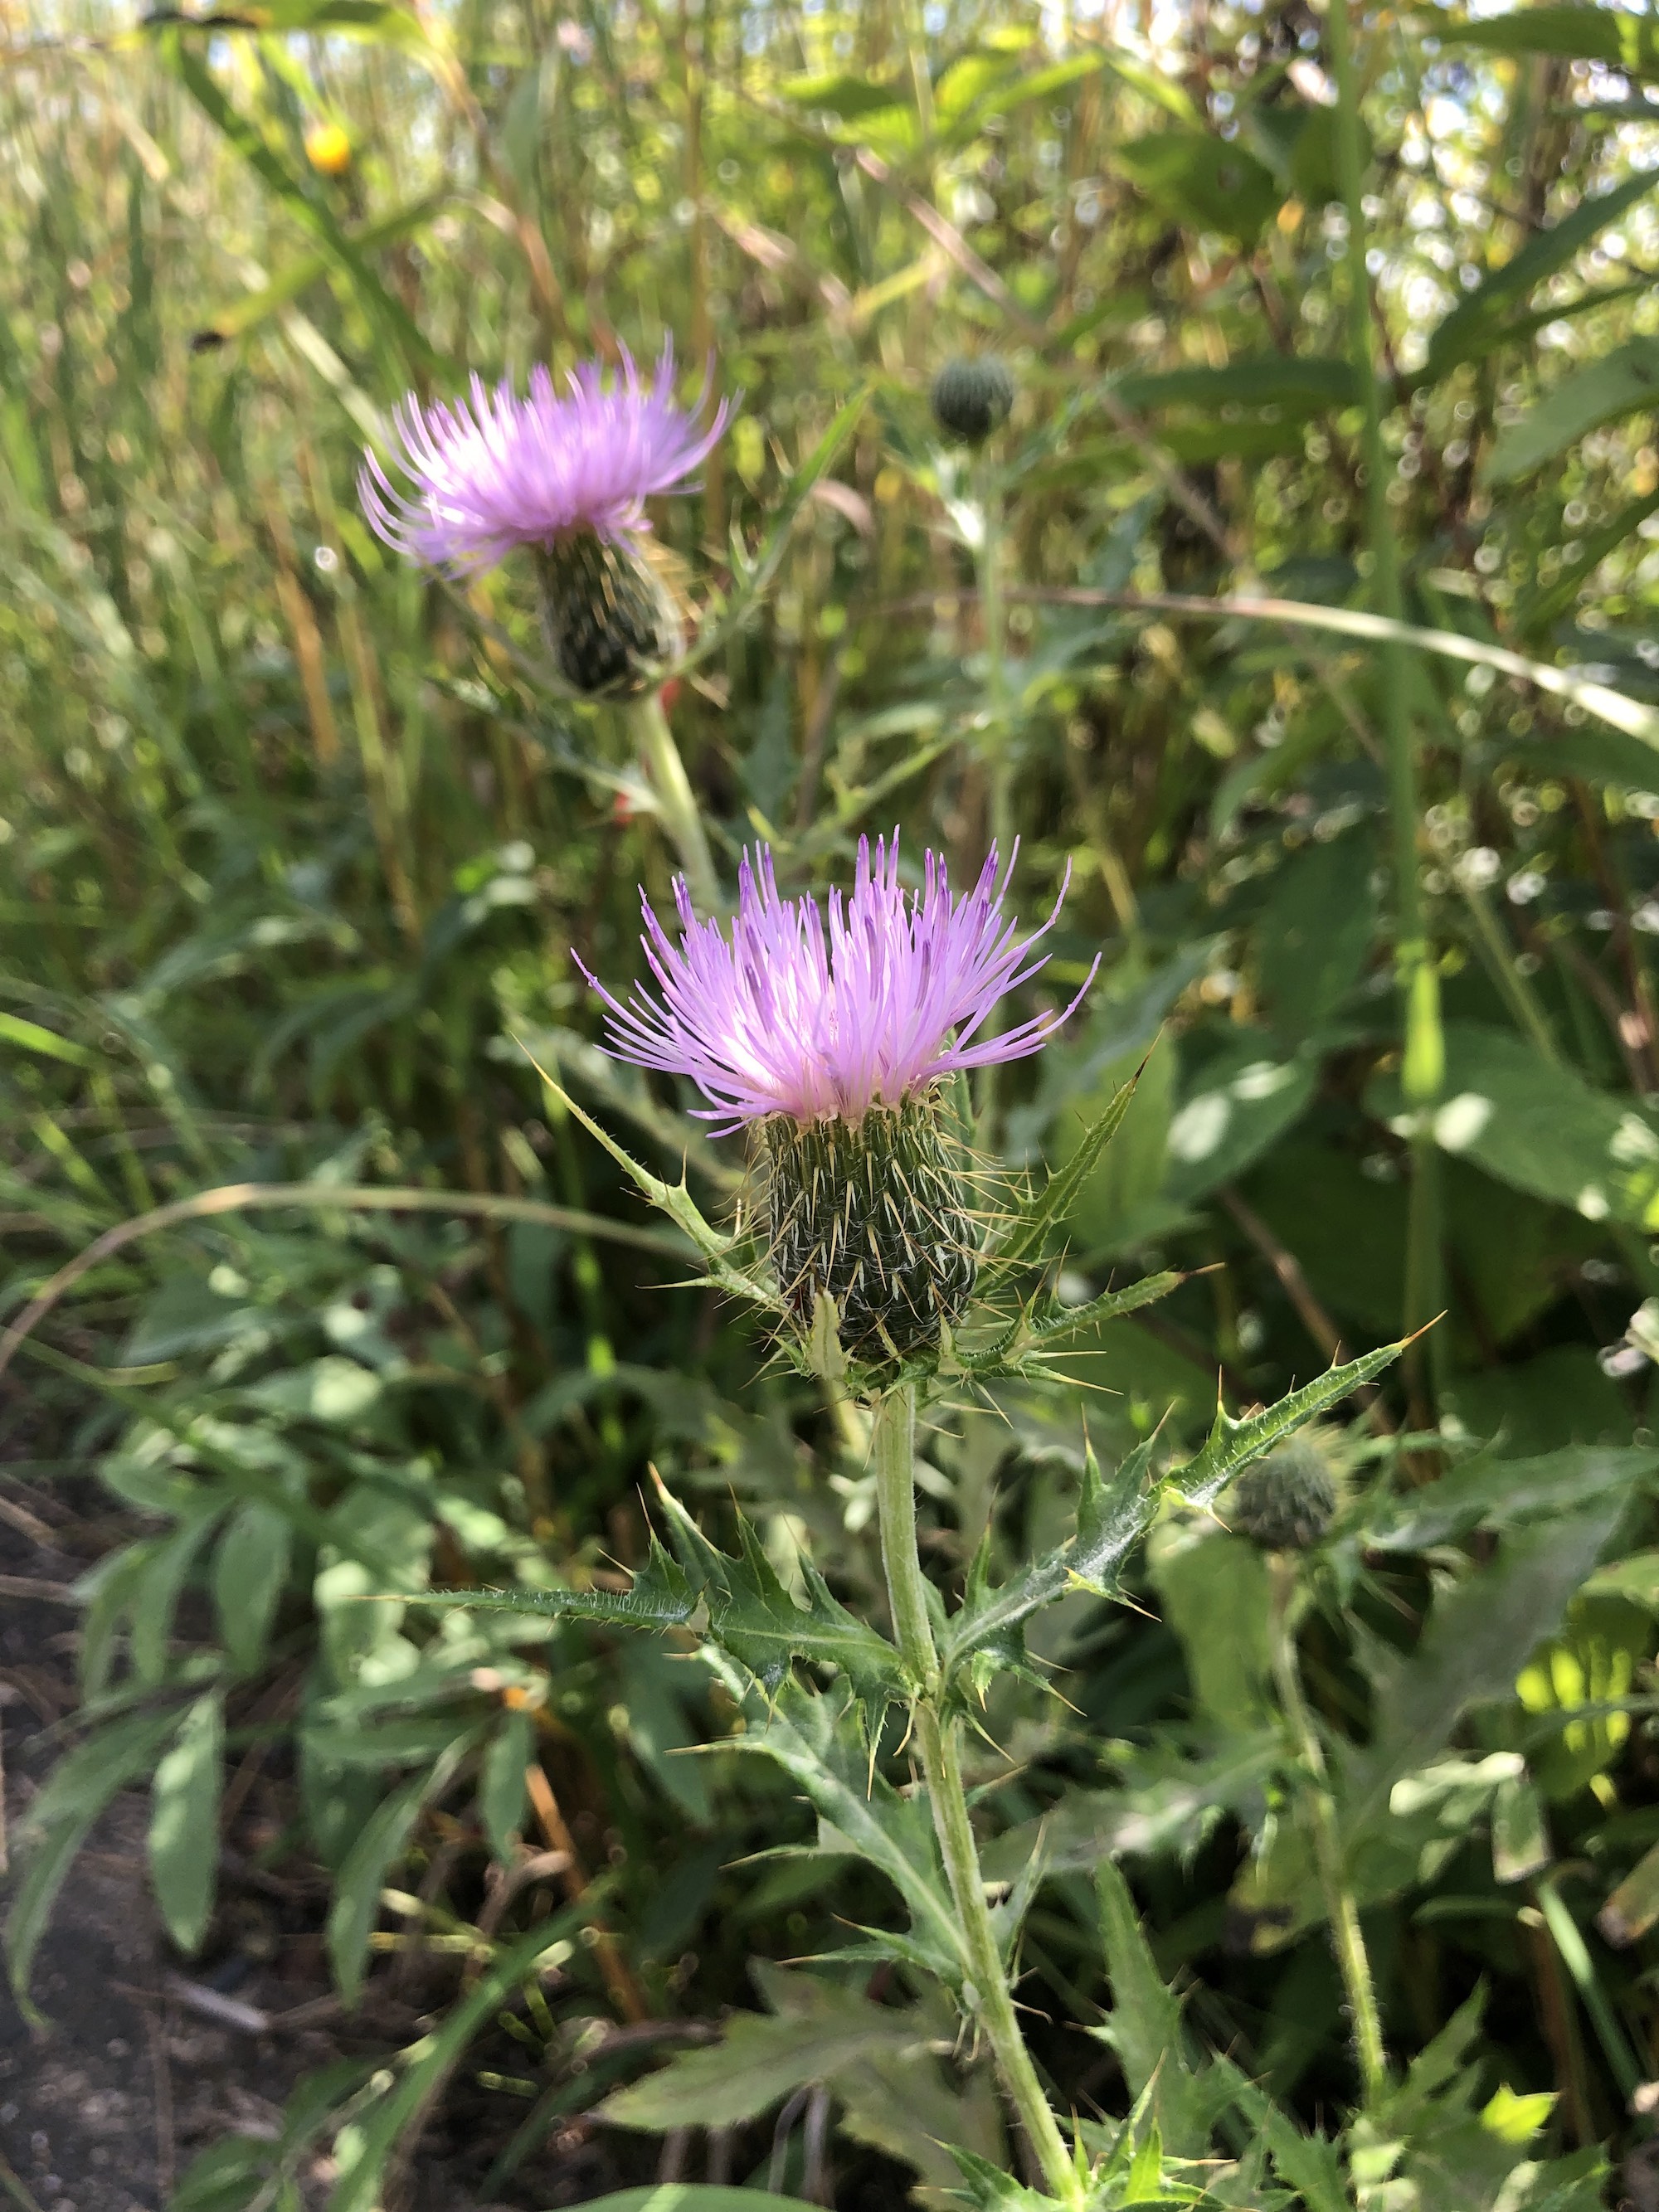 Field Thistle in UW Arboretum gardens in Madison, Wisconsin on September 7, 2022.  This is a short new growth of a taller stalk that was cut.